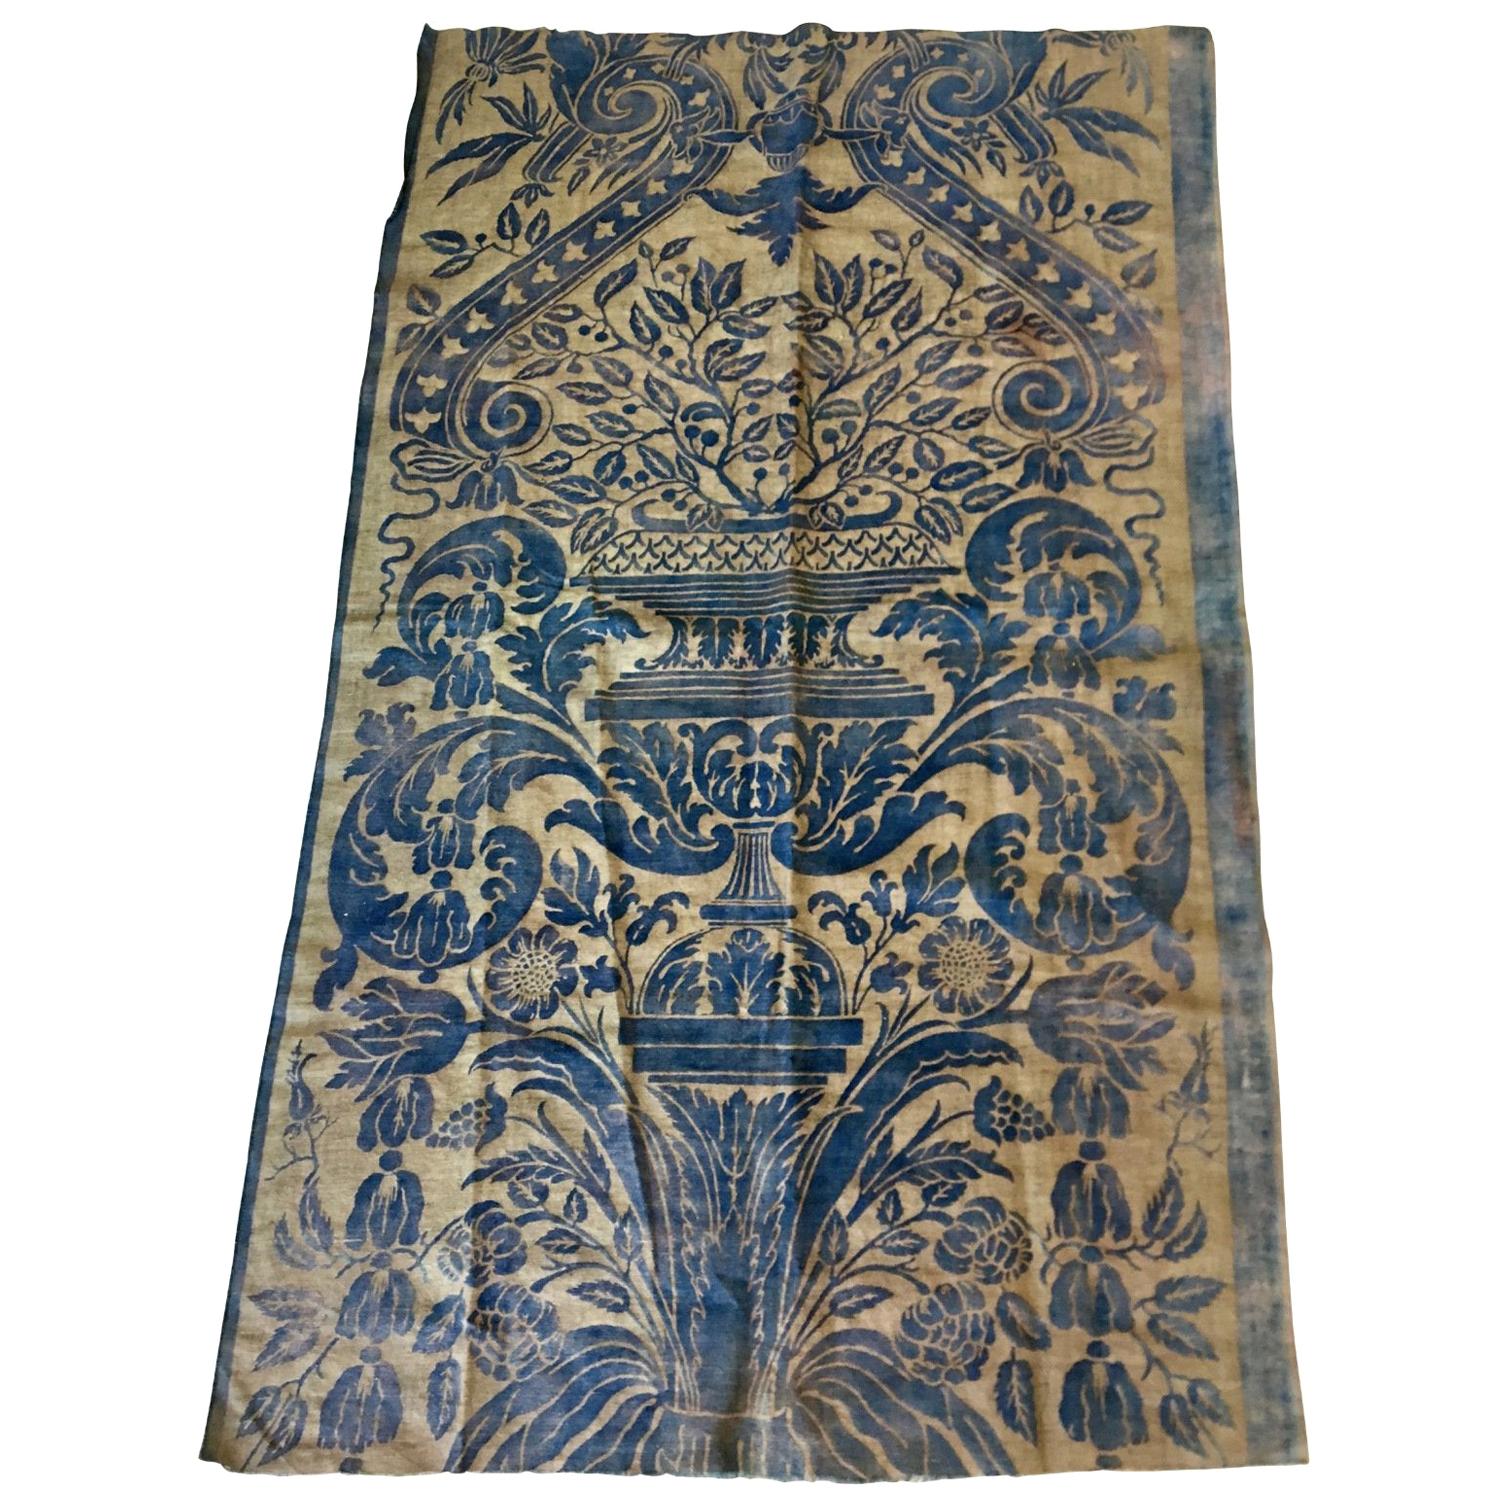 Length of Beautiful Blue Vintage Fortuny Fabric